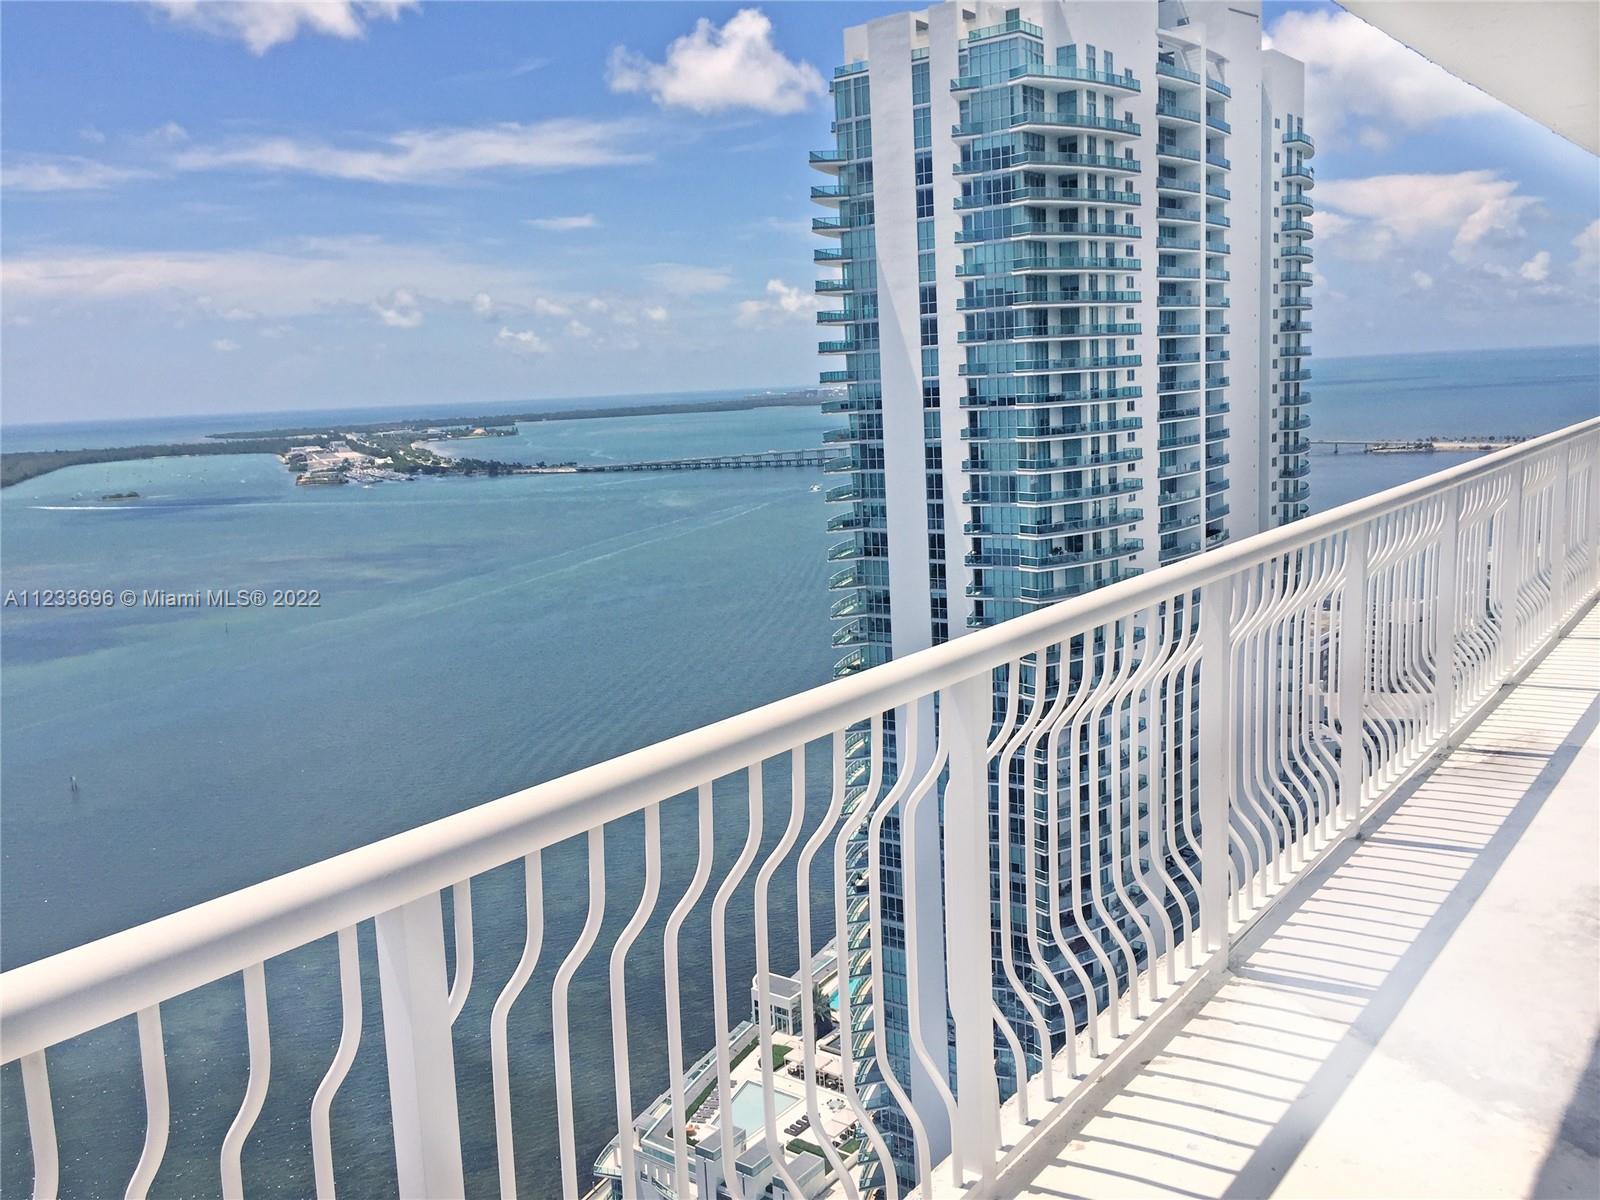 Impeccable Penthouse.  Spectacular direct water views from this PH Unit.  3 beds/2 baths unit with wraparound balcony in the best line of the building. Lucrative investment opportunity in the heart of Brickell. No rental restrictions, making it perfect for Airbnb. Low maintenance fee. Water, basic cable, and internet included. Full resort amenities, building recently updated, including two pools, hot tub, gym, game room, guarded entry, valet parking, and much more. Perfect location! Steps from Brickell City Centre, Mary Brickell Village, dozens of restaurants, and bars. Minutes away from the beach and More...True PH and BRICKELL SHORT TERM RENTAL BUILDING LOW MONTHLY HOA.  Investor financing as low as 15% A POSSIBILITY.